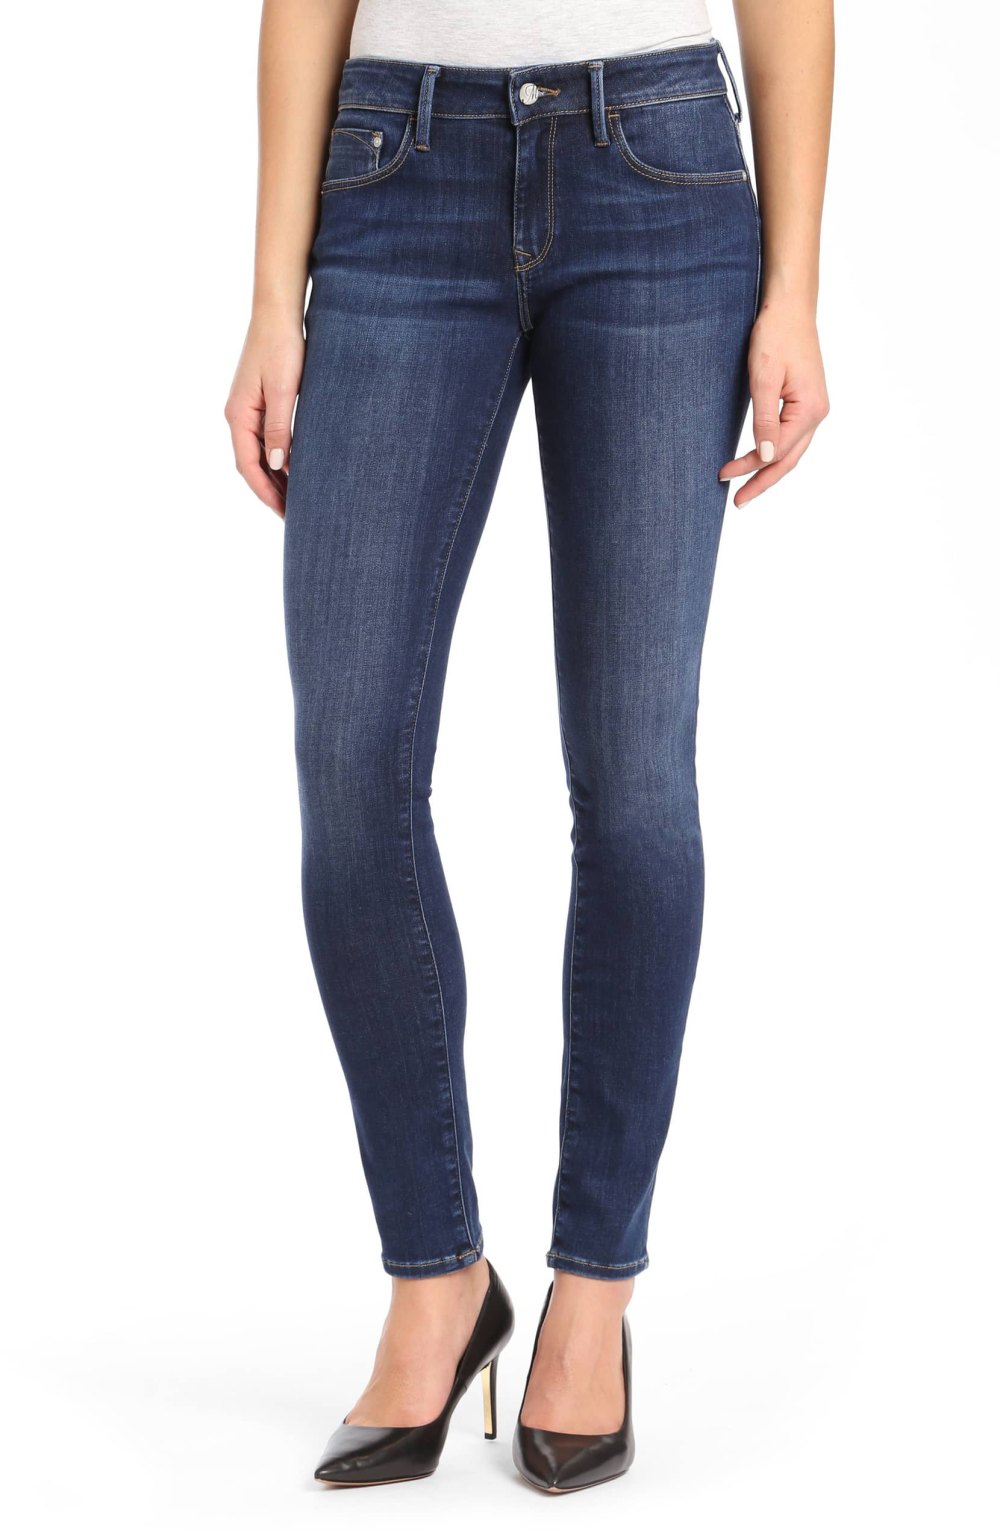 Shop These Stretch Skinny Jeans for Under $100 at Nordstrom | UsWeekly